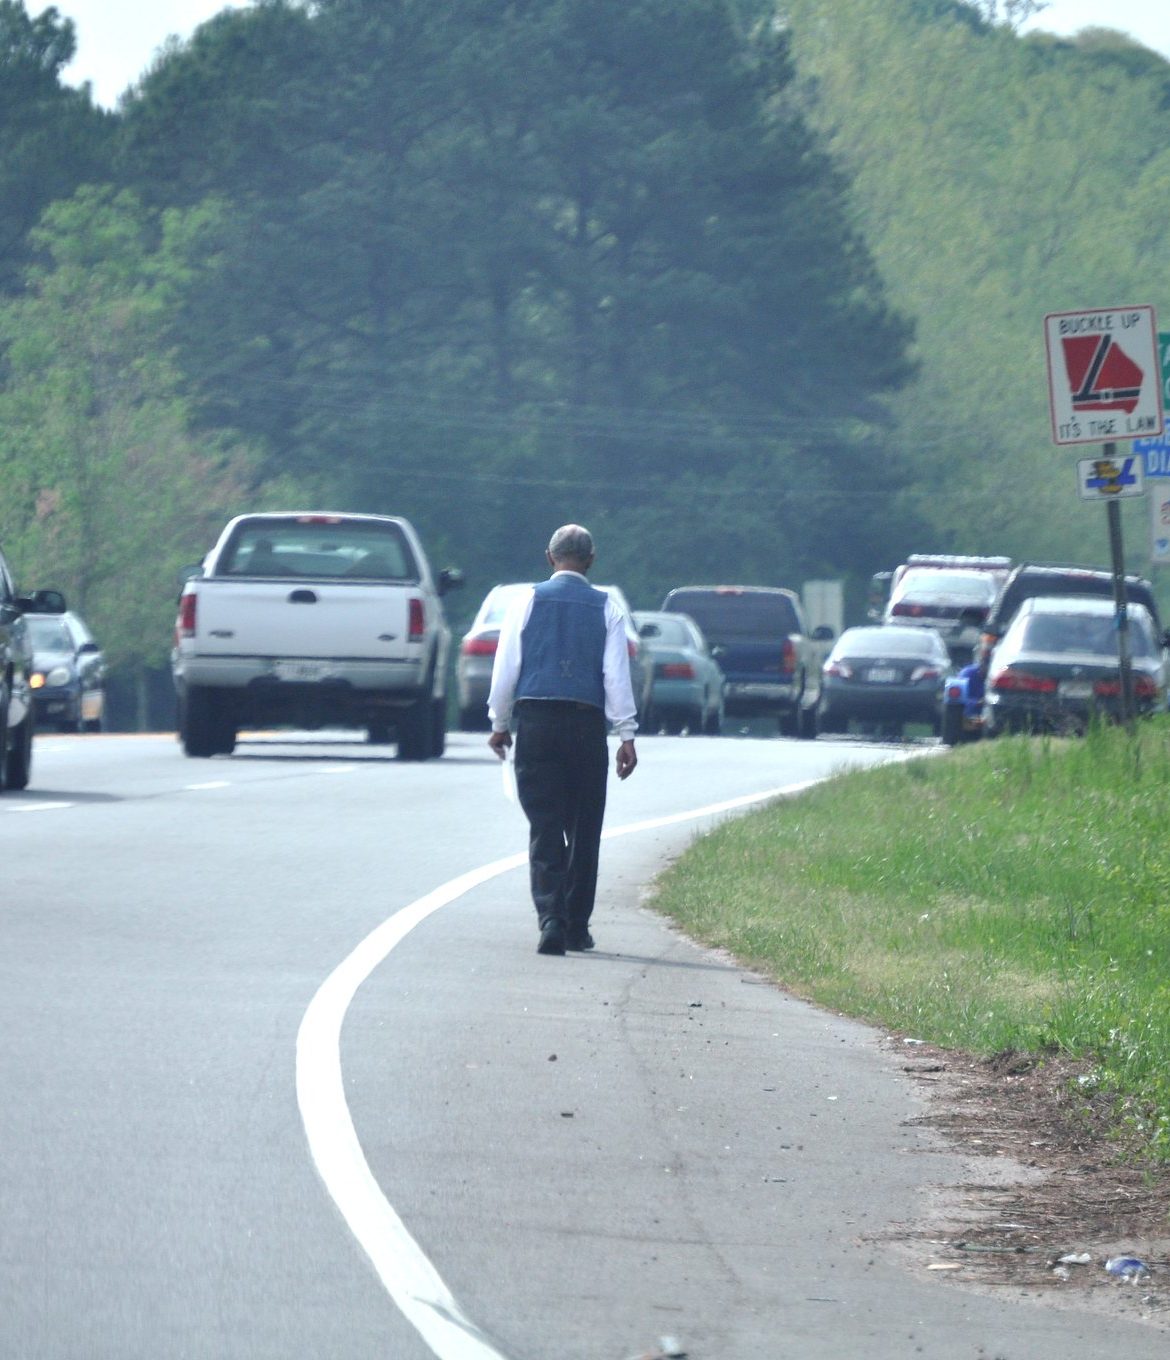 A pedestrian walks along the edge of a road filled with cars.